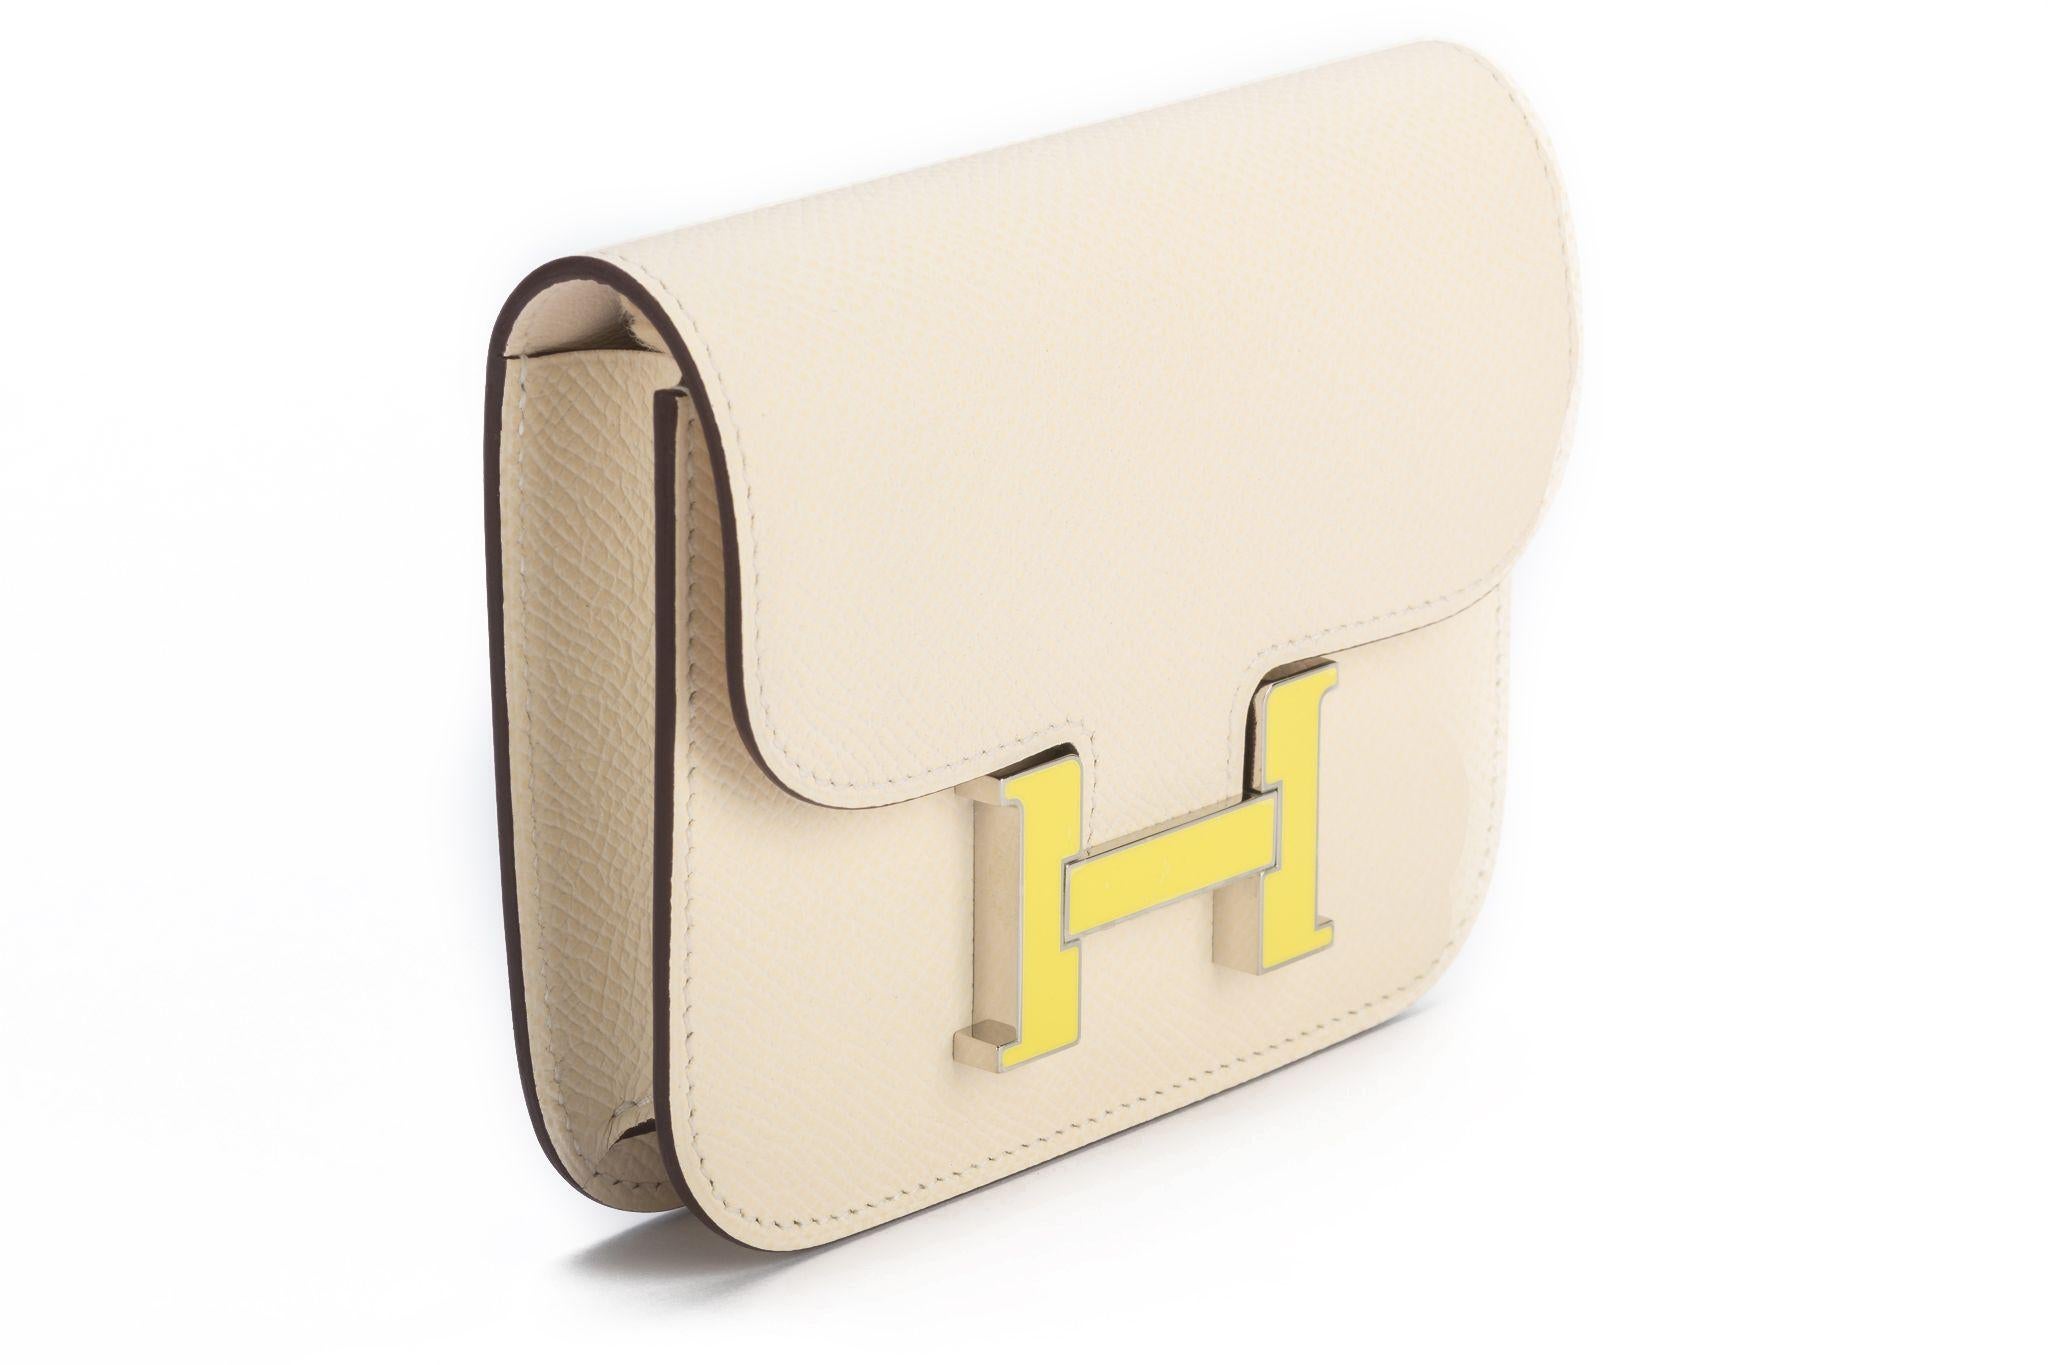 Hermès Slim wallet in craie Epsom calfskin with removable zipped change purse, 2 credit card slots, belt loop and yellow enamel and palladium plated closure. The piece is in the house's color Craie Off White. The item comes with the original